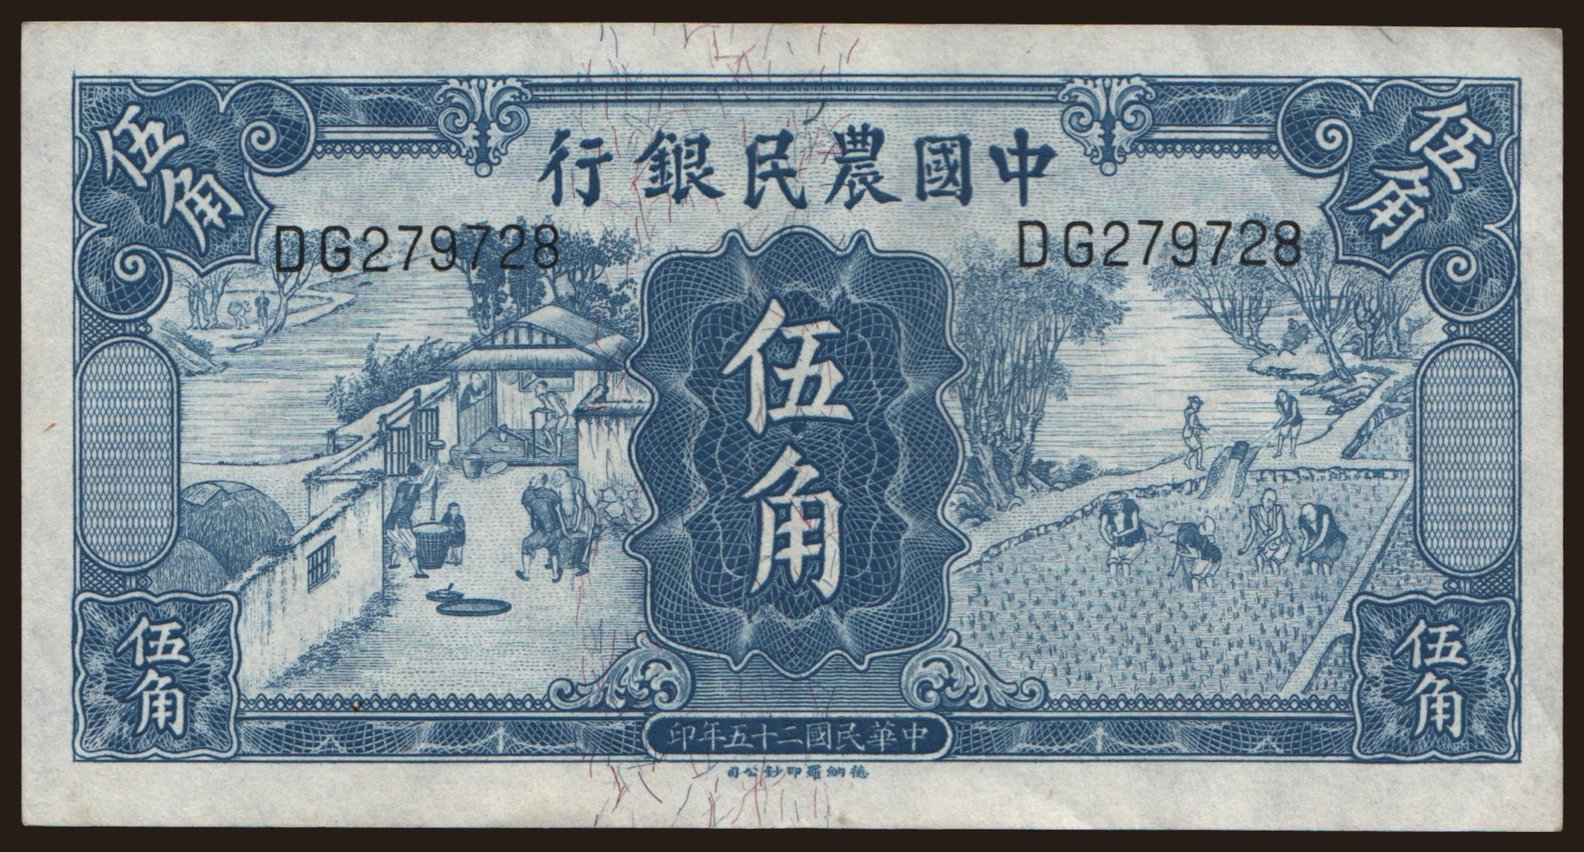 Farmers Bank of China, 50 cents, 1936